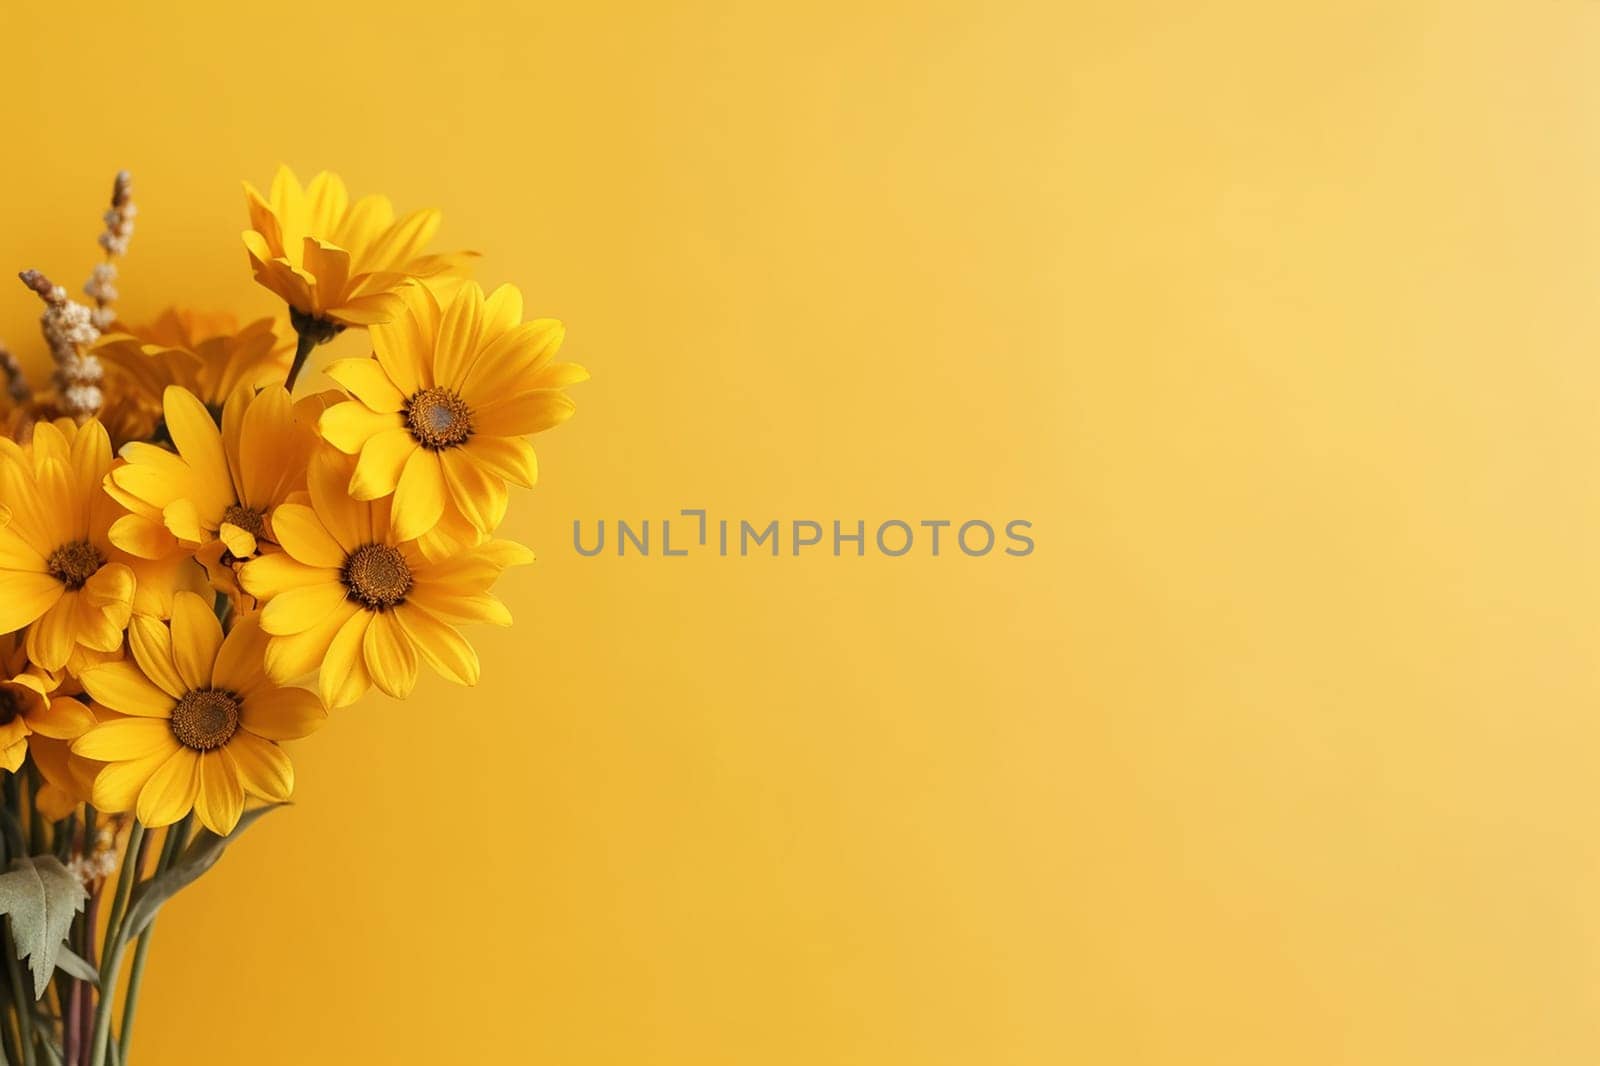 Bright yellow sunflowers against a plain yellow background. by Hype2art